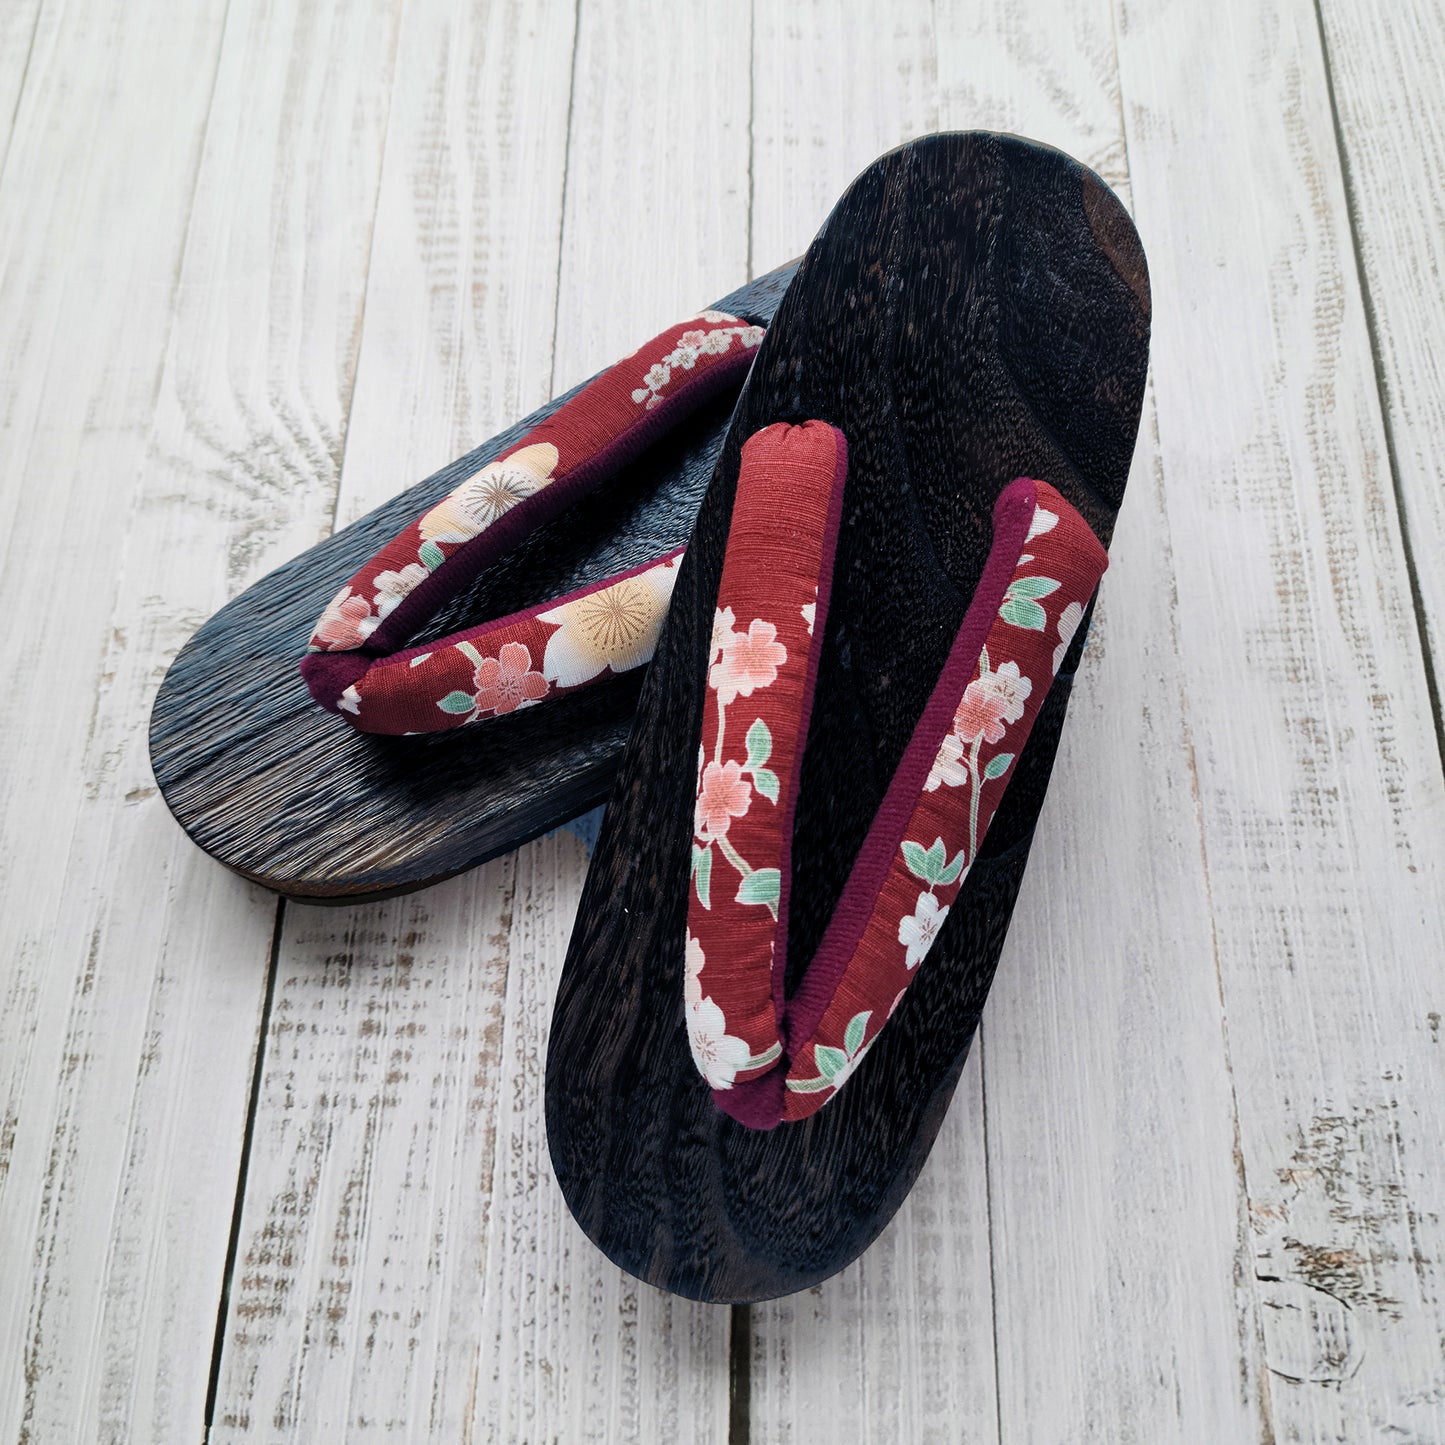 Geta Sandals for Women - Cherry Blossoms in Maroon